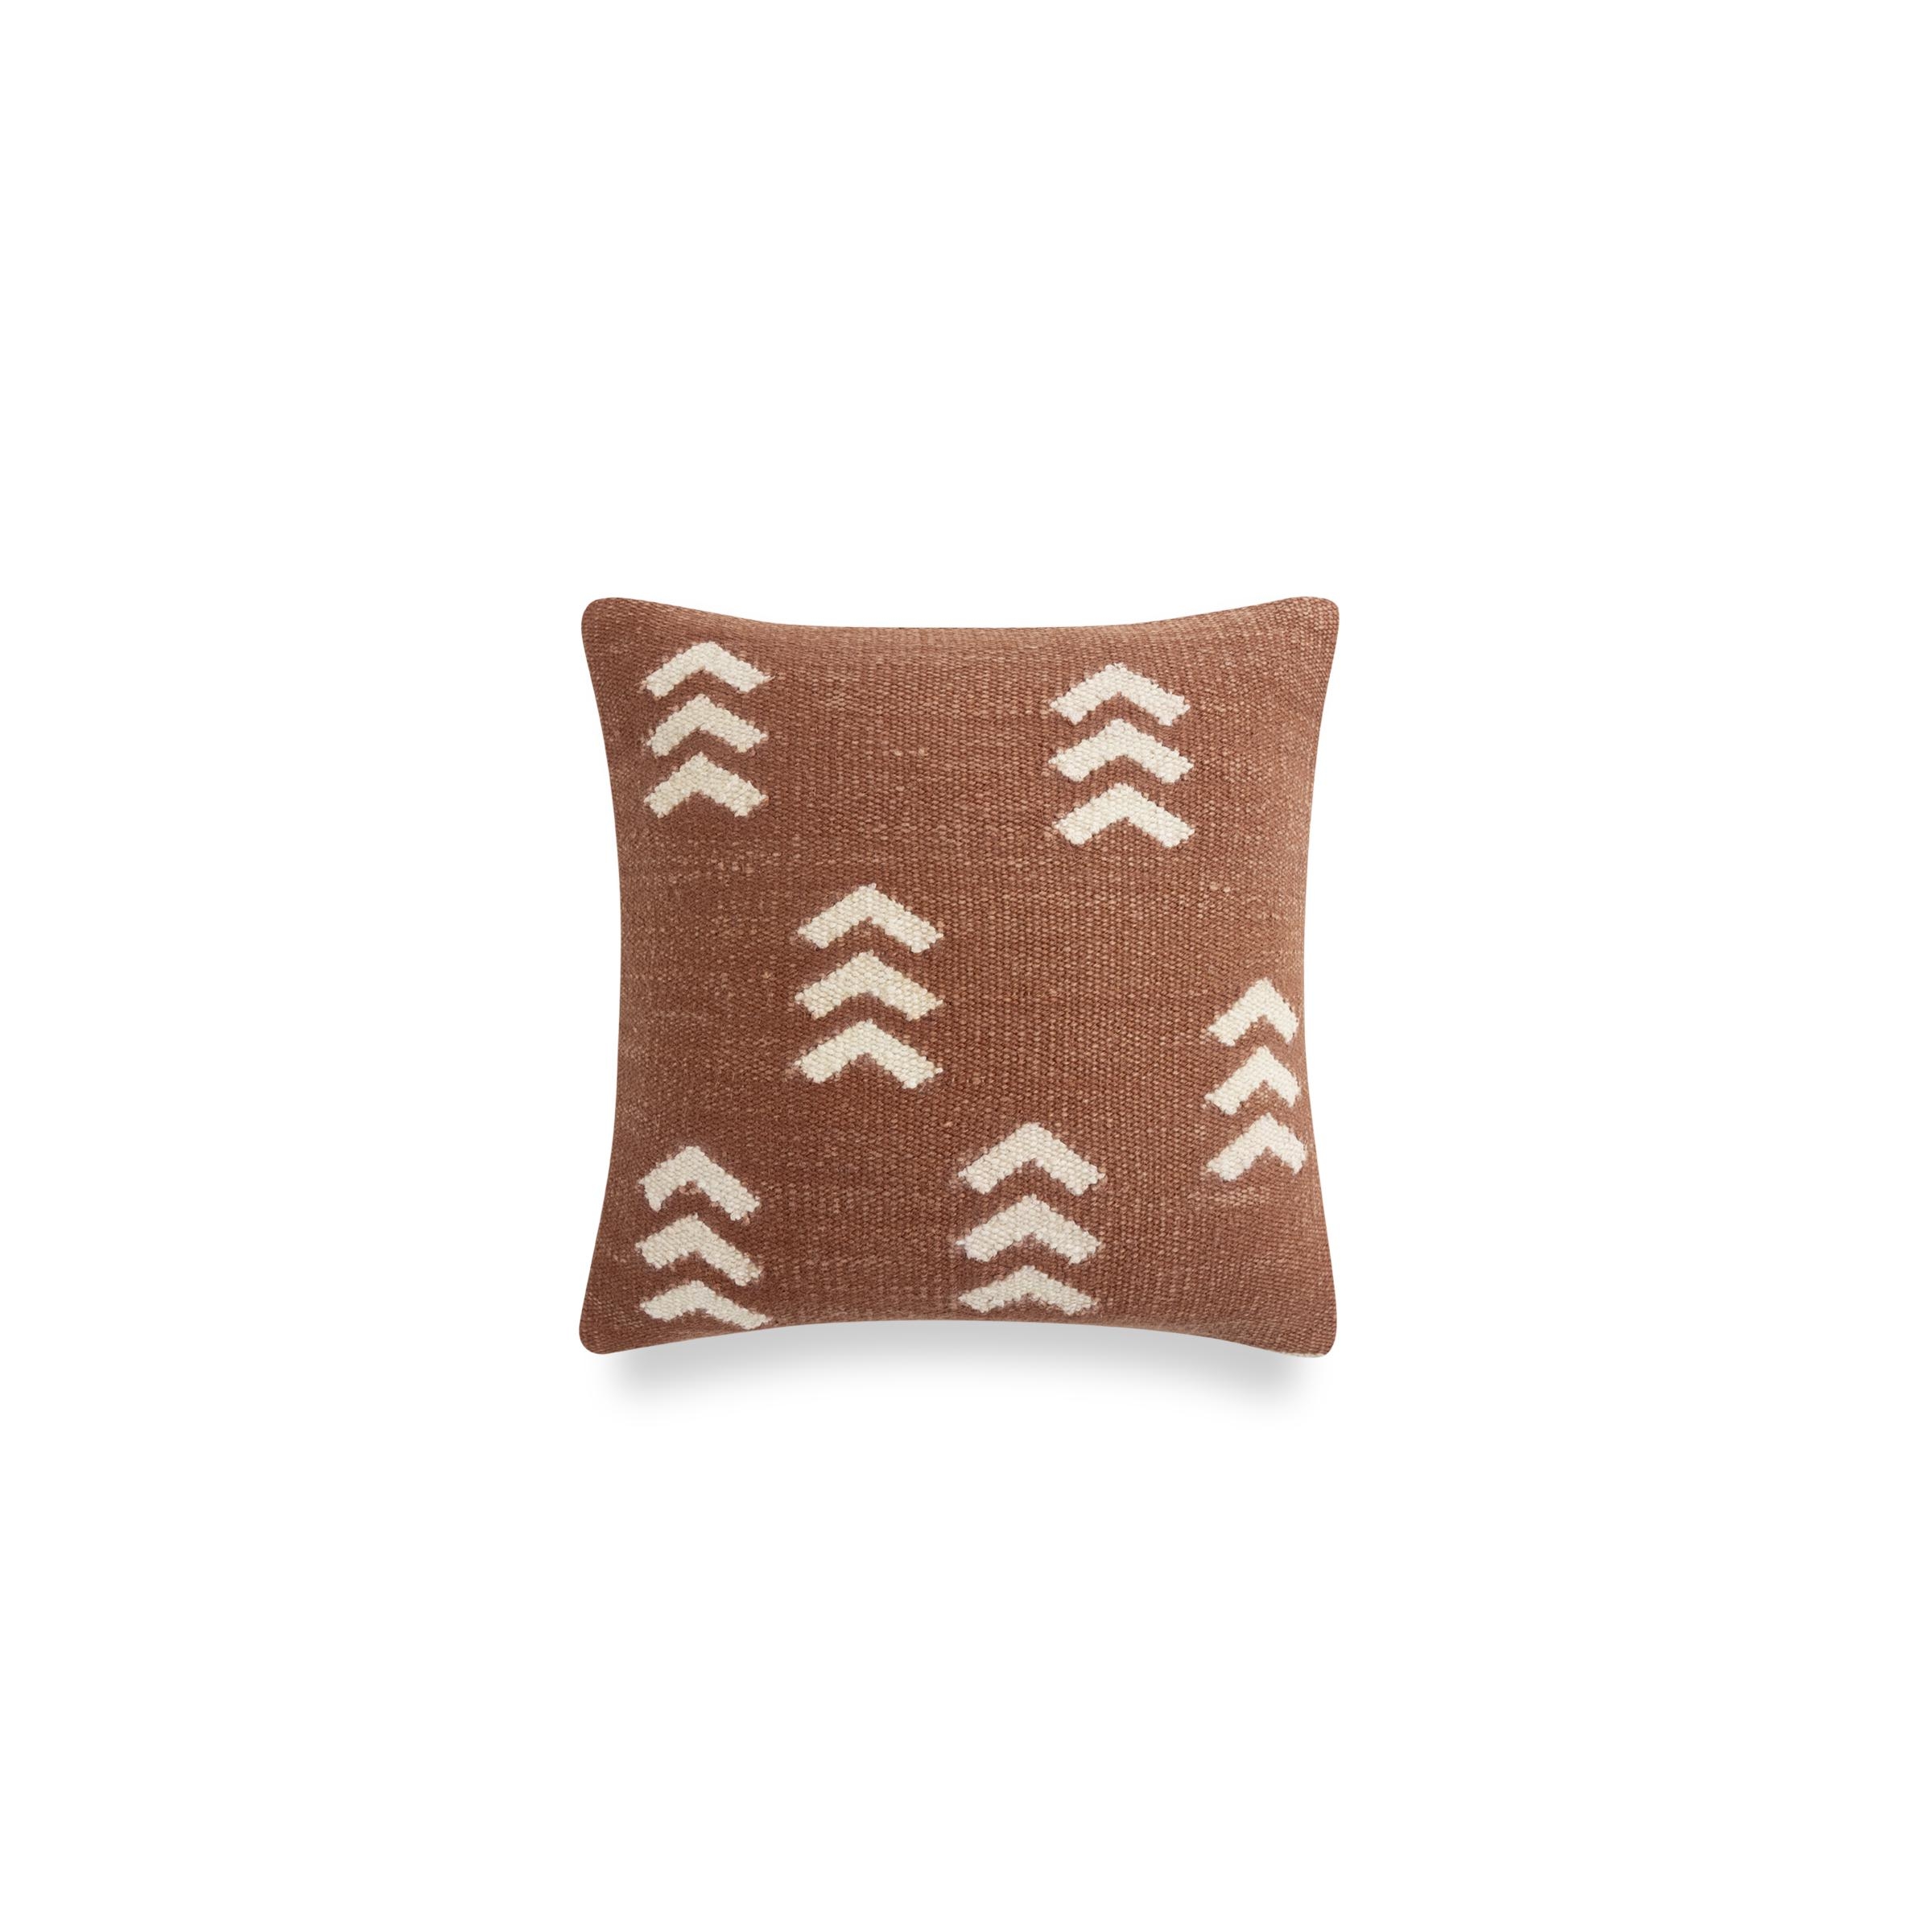 Chevron Hand-tufted Pillow Cover in Brick Red - Image 0